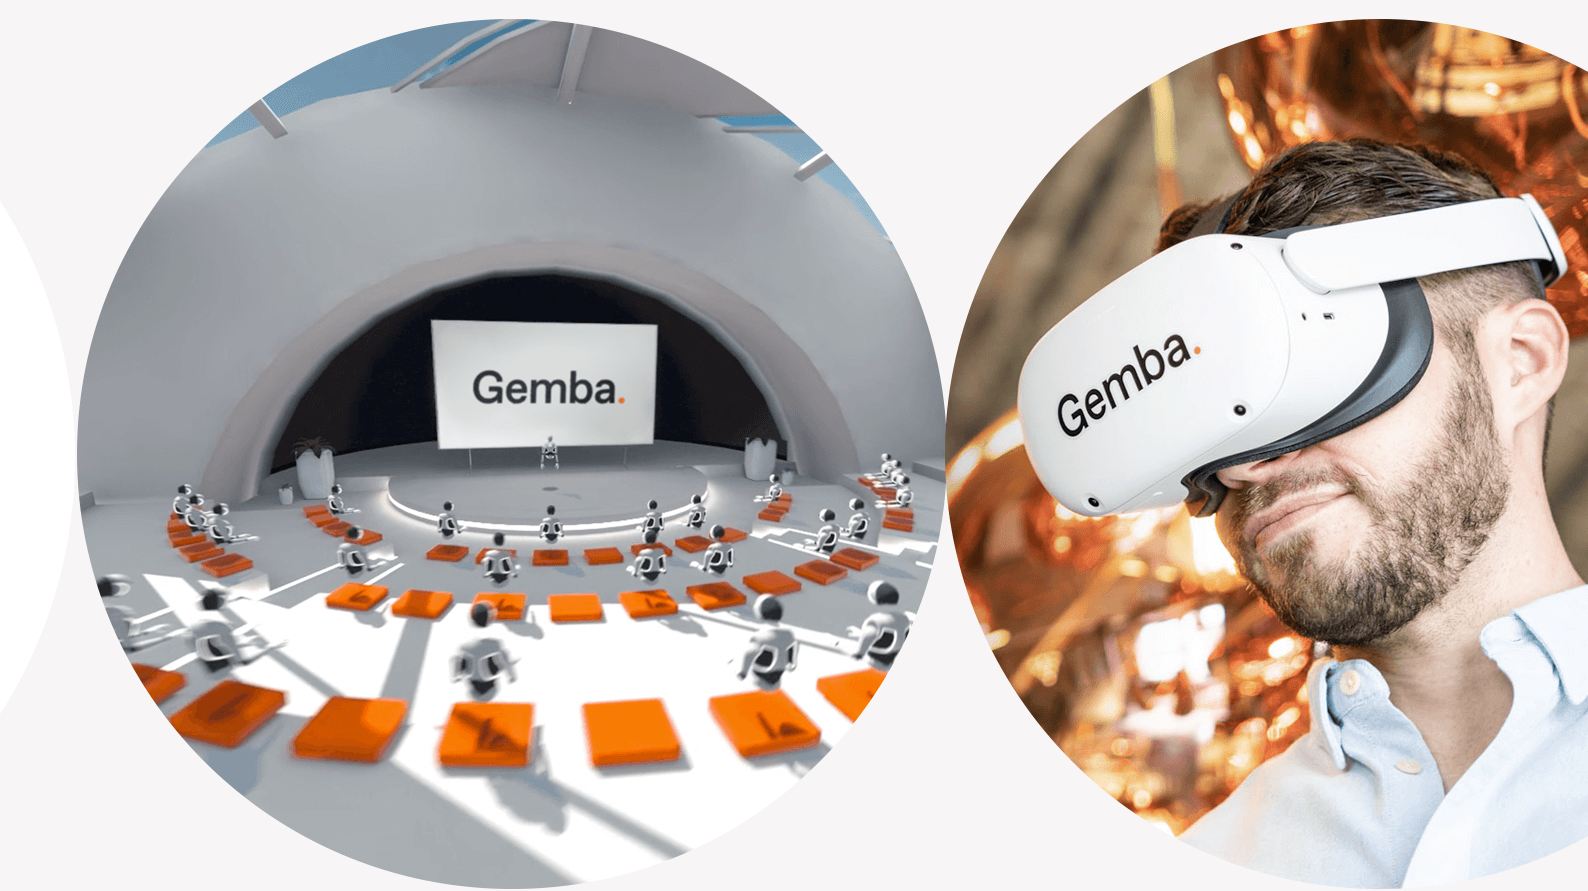 Gemba, a corporate VR training platform used by Coca-Cola and Pfizer, raises $18M